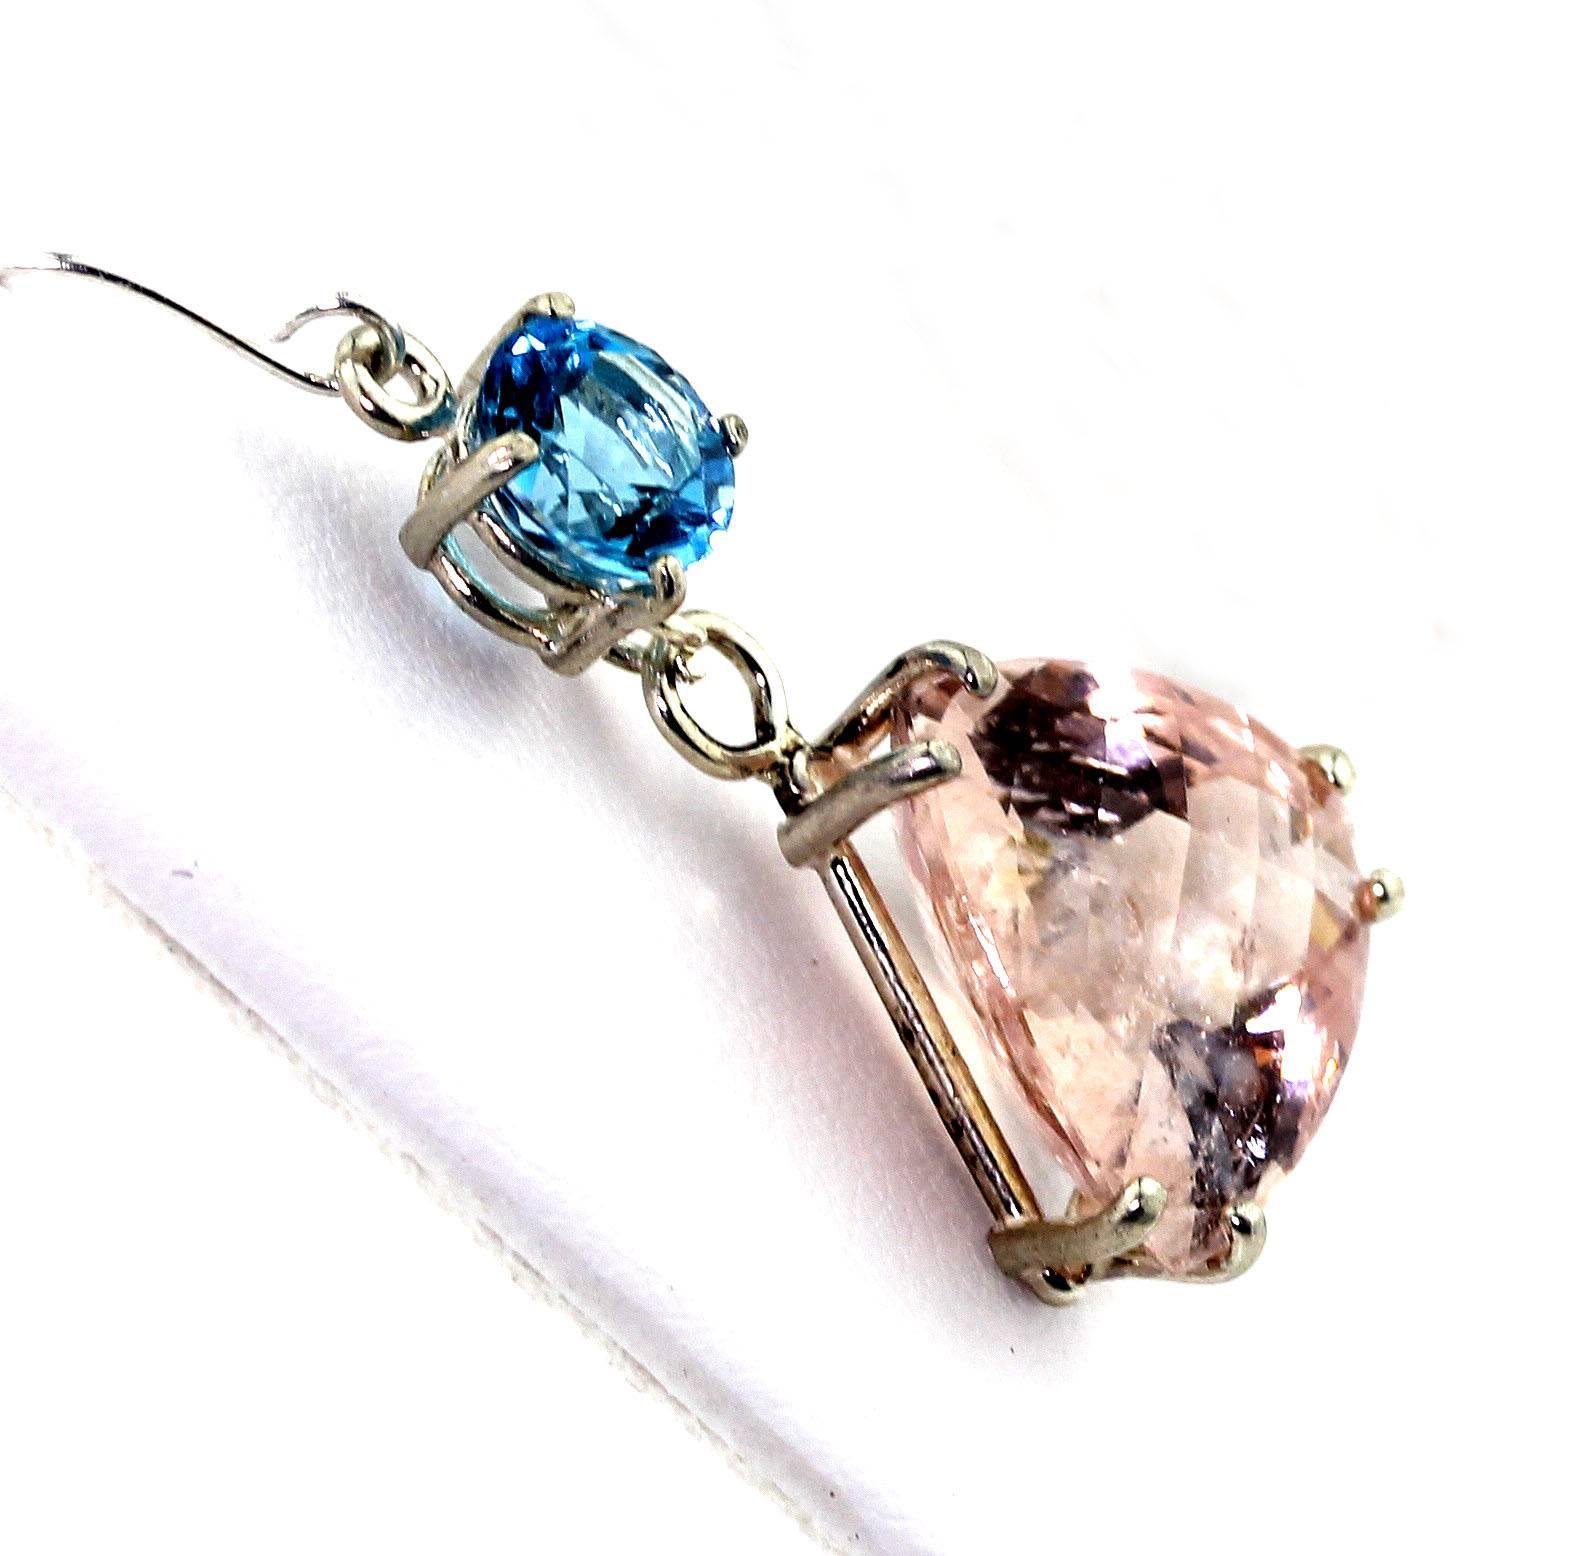 Dangling swinging pink checkerboard gem cut trillion Krinkle Morganites (17 mm x 16 mm) hang elegantly from these brilliant blue Topaz (7 mm).  They hang approximately 1.5 inches from top of the sterling silver hook to the bottom of the Morganite.